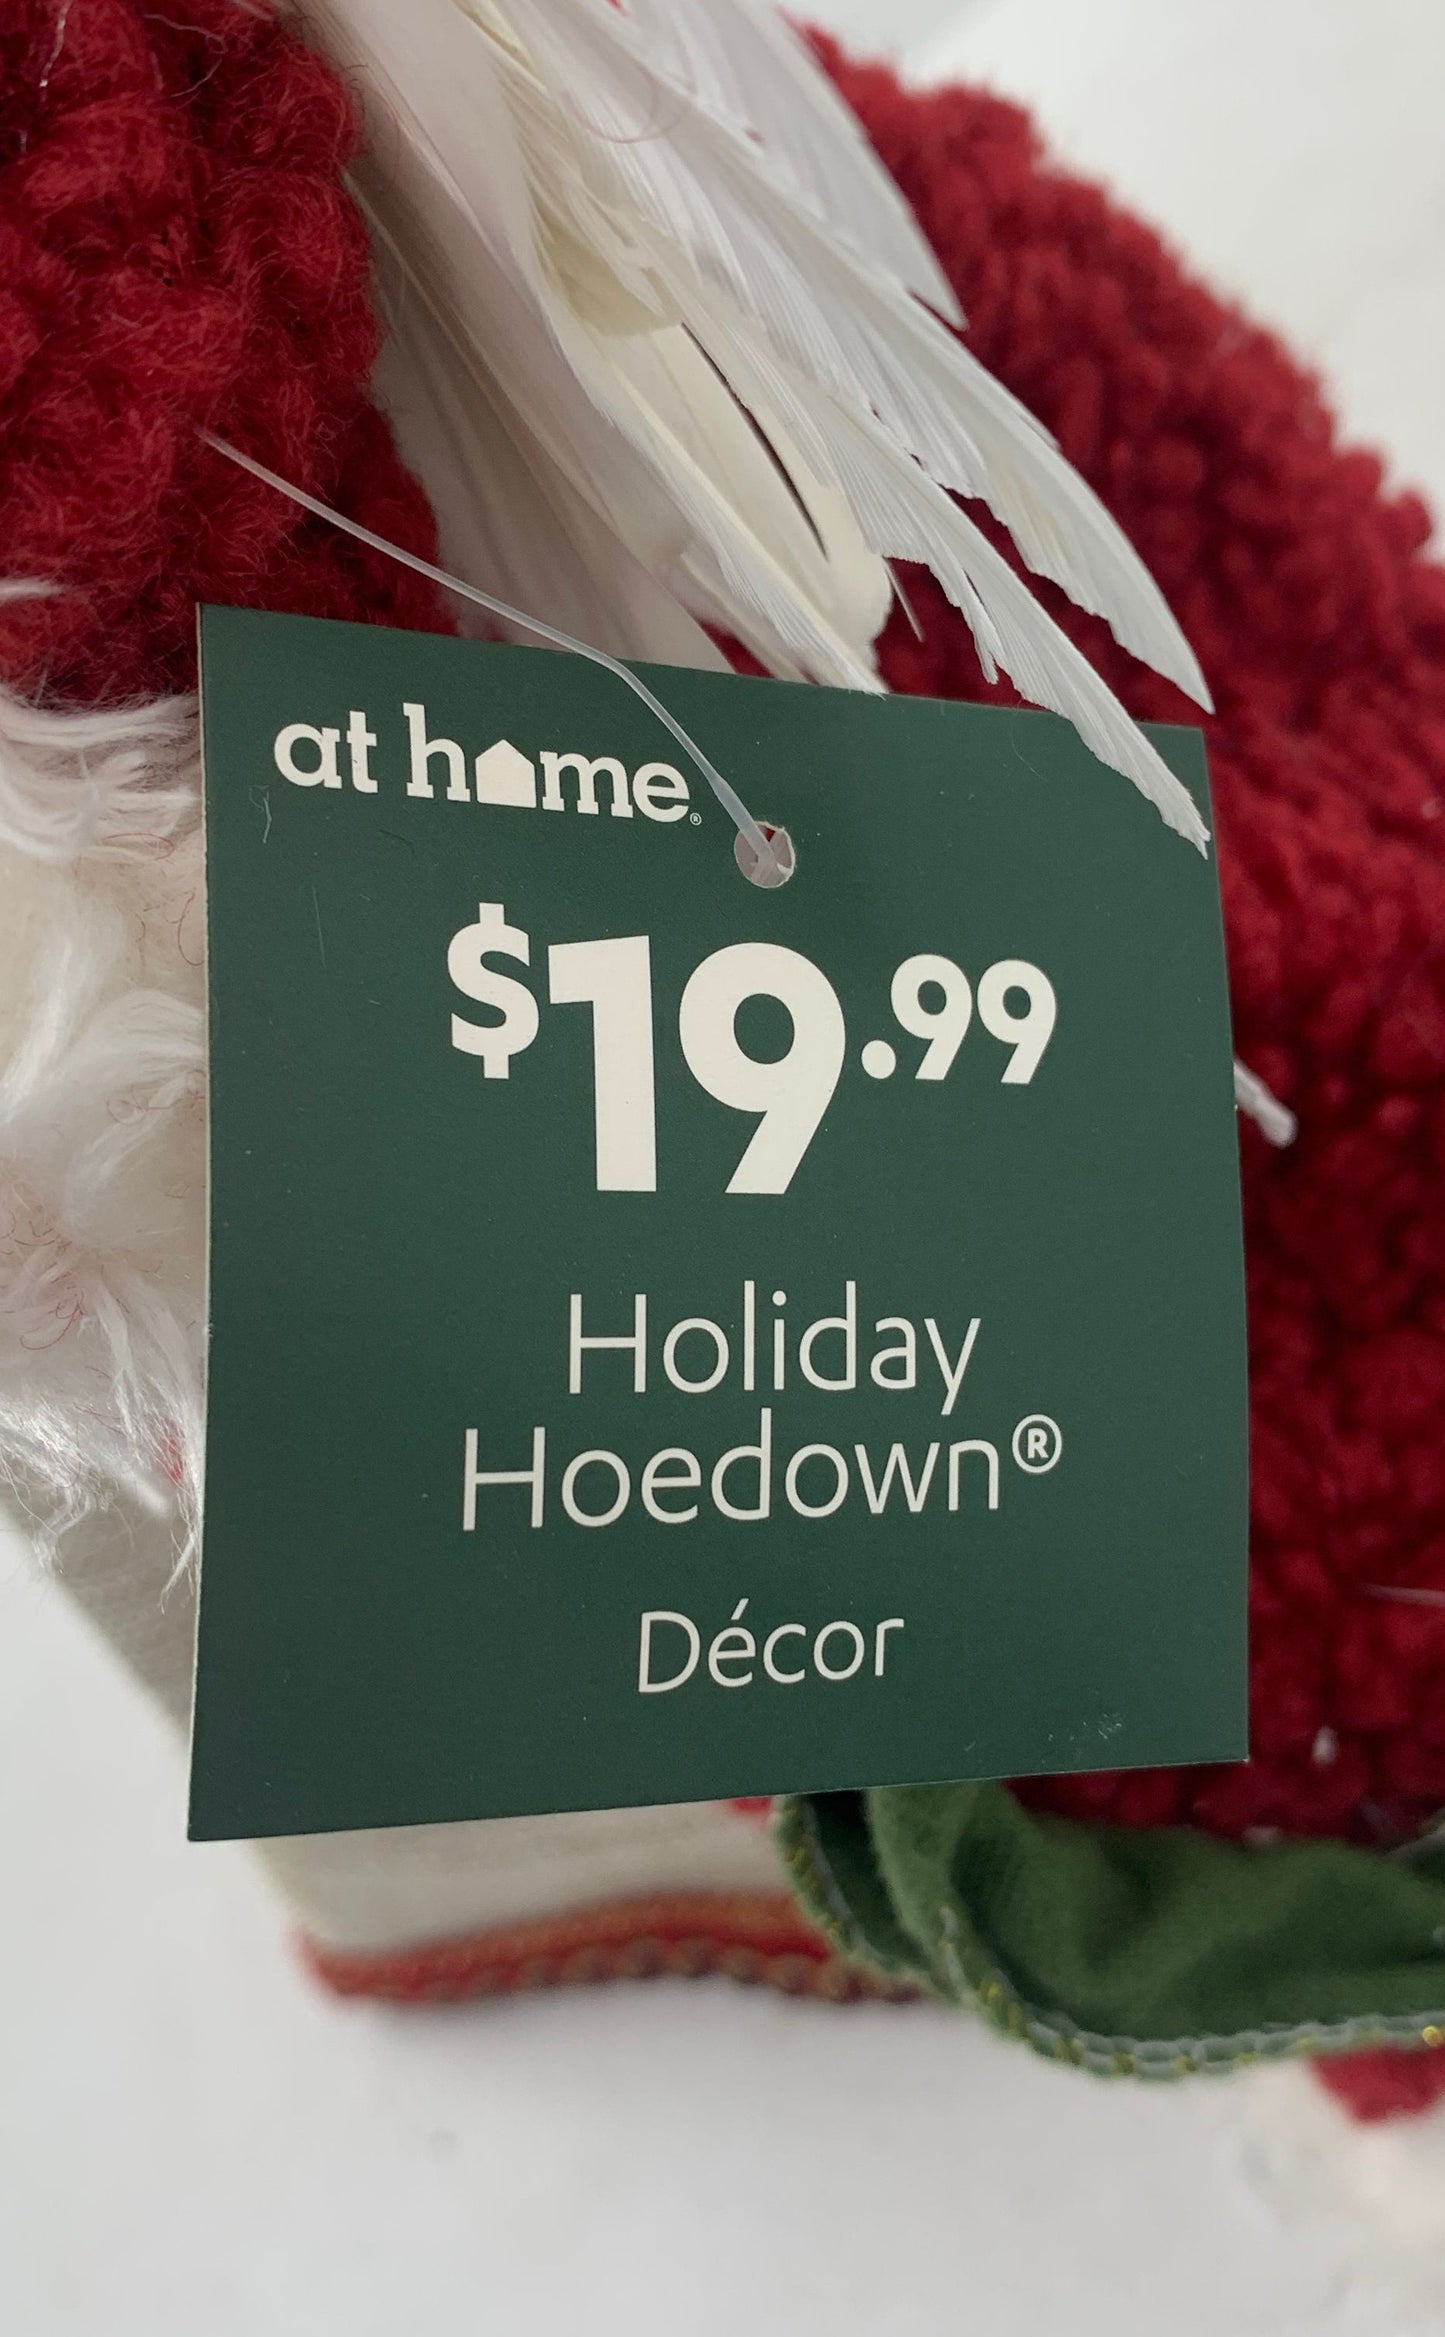 At Home Brand New Holiday Hoedown Angel Christmas Tree Topper